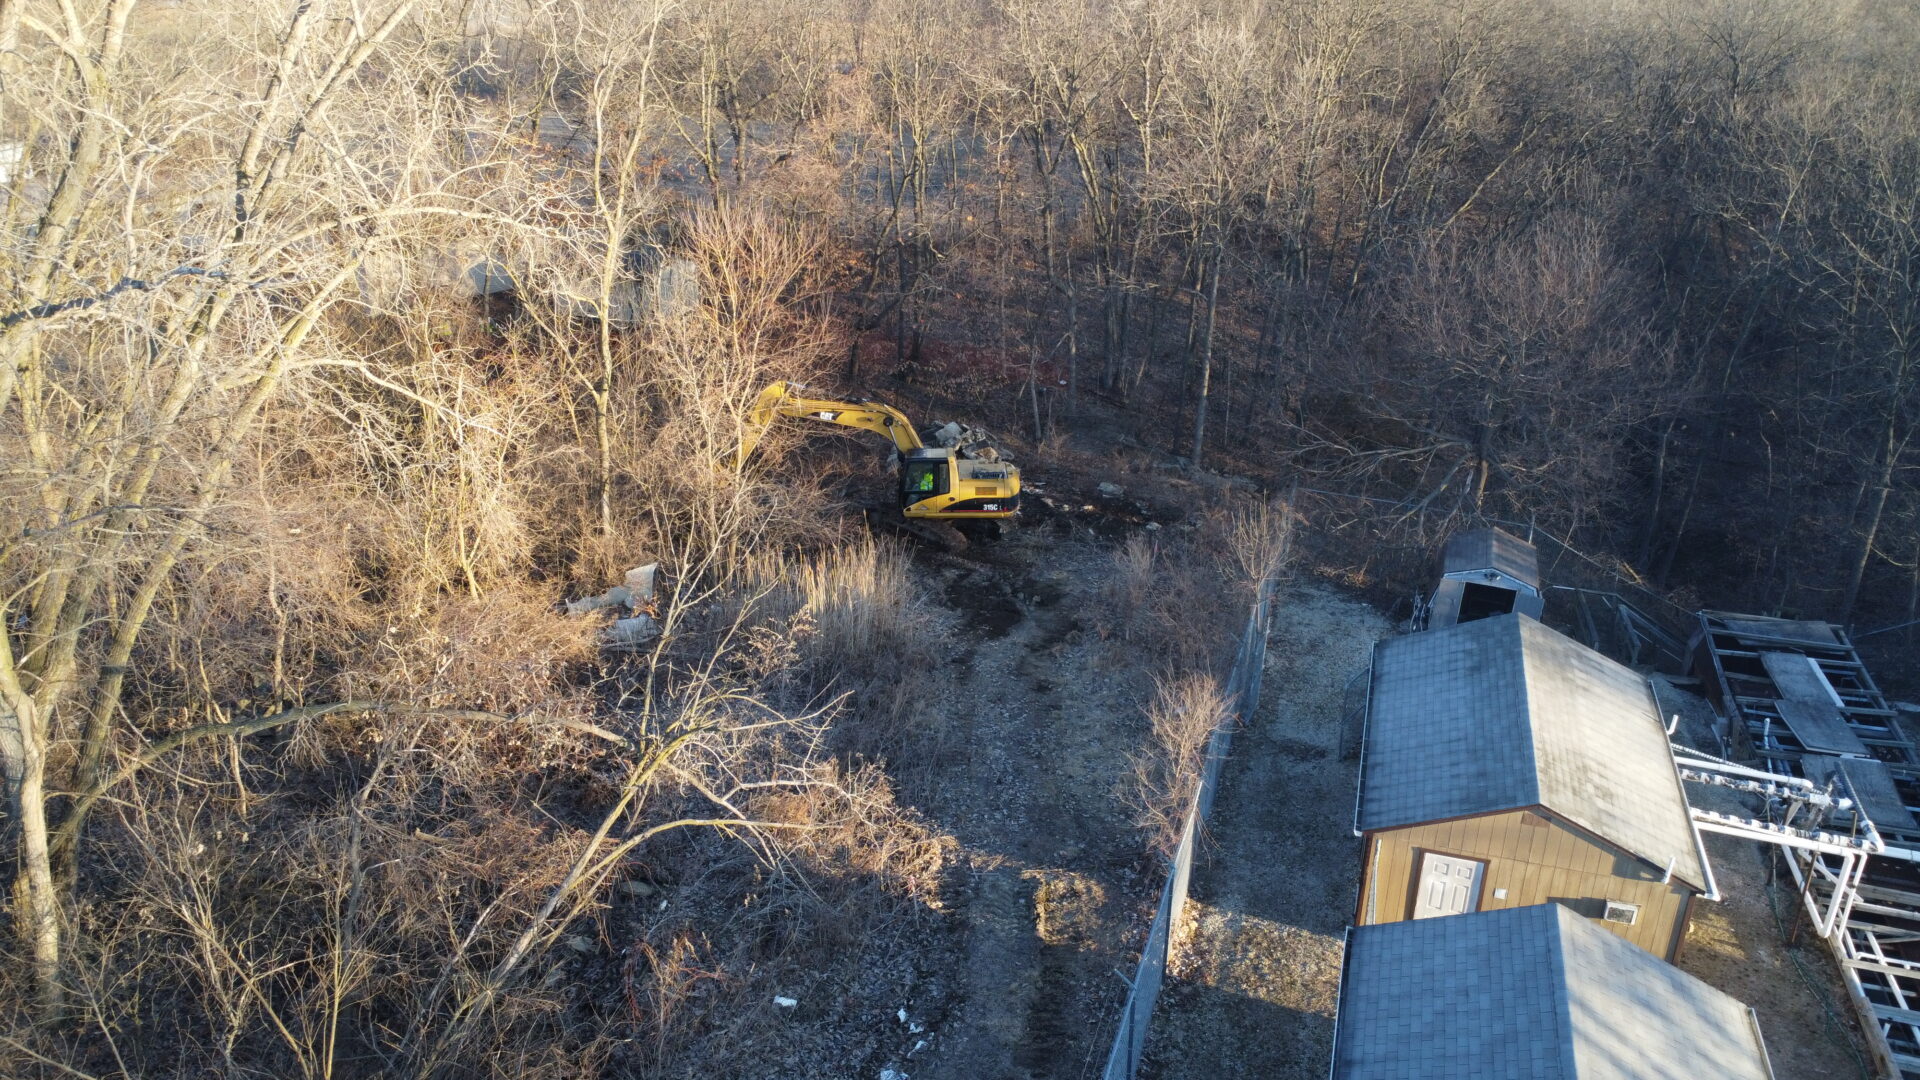 Aerial view of yellow excavator in a barren forest.